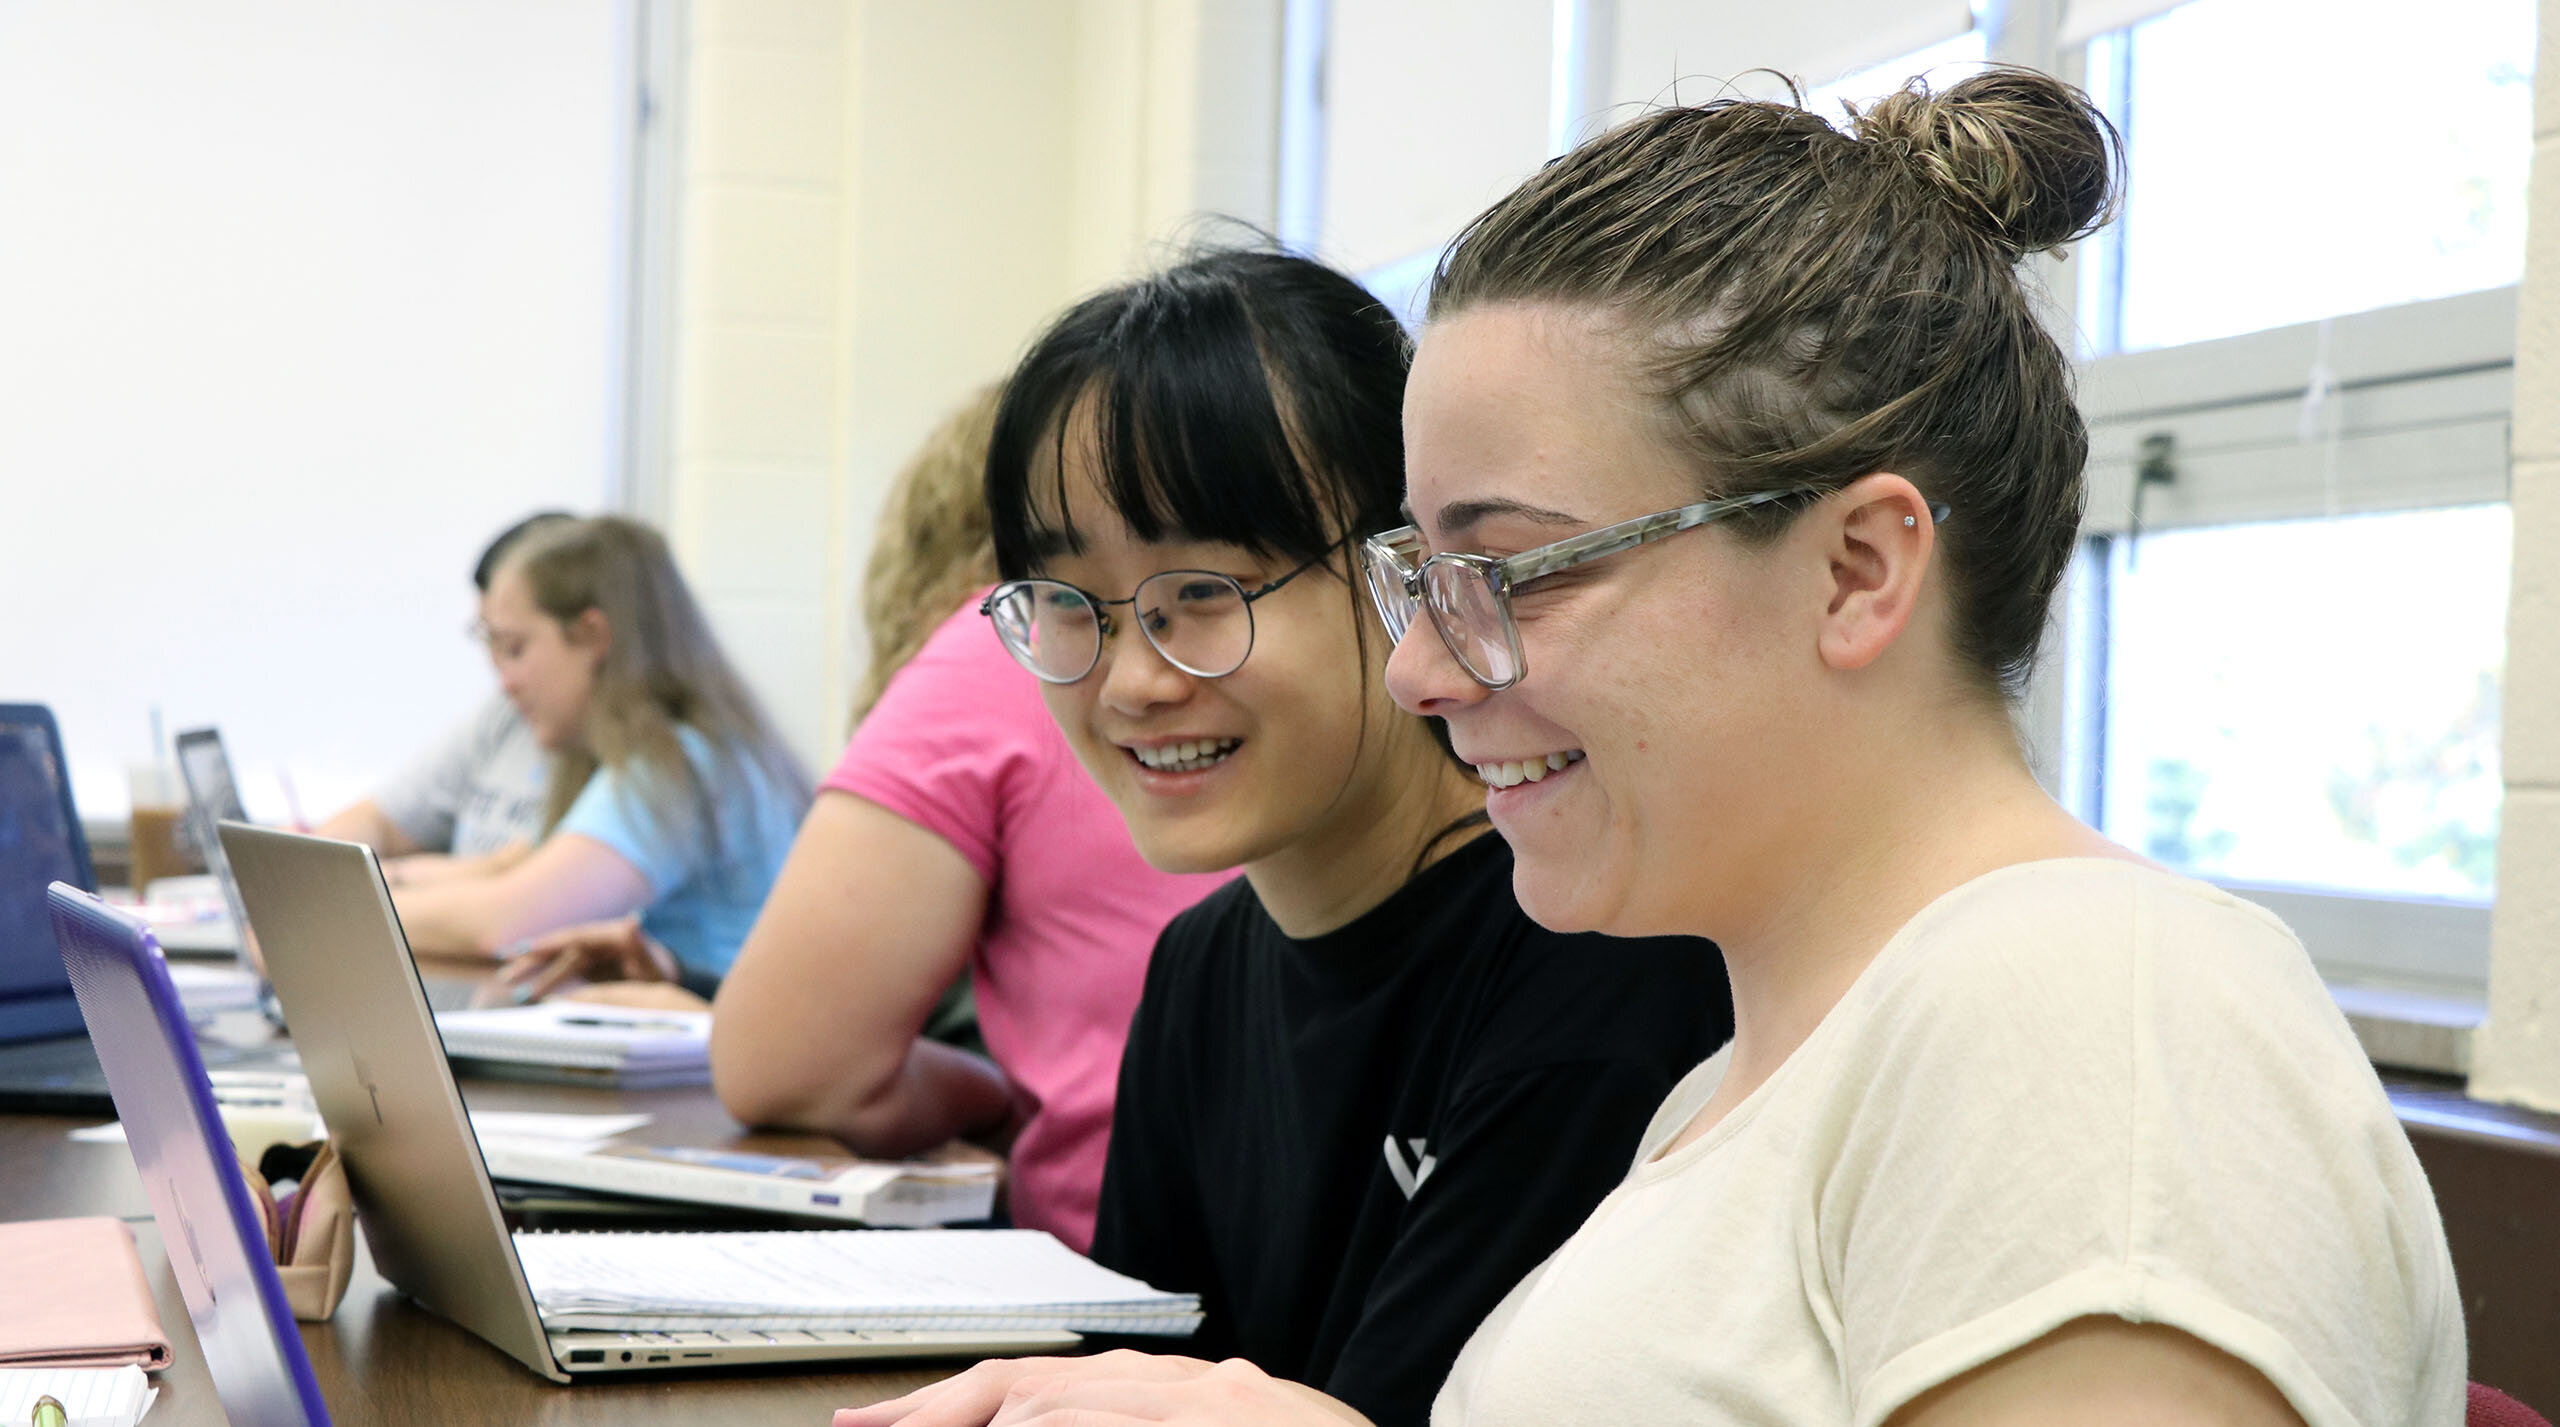 Students smiling and working in class